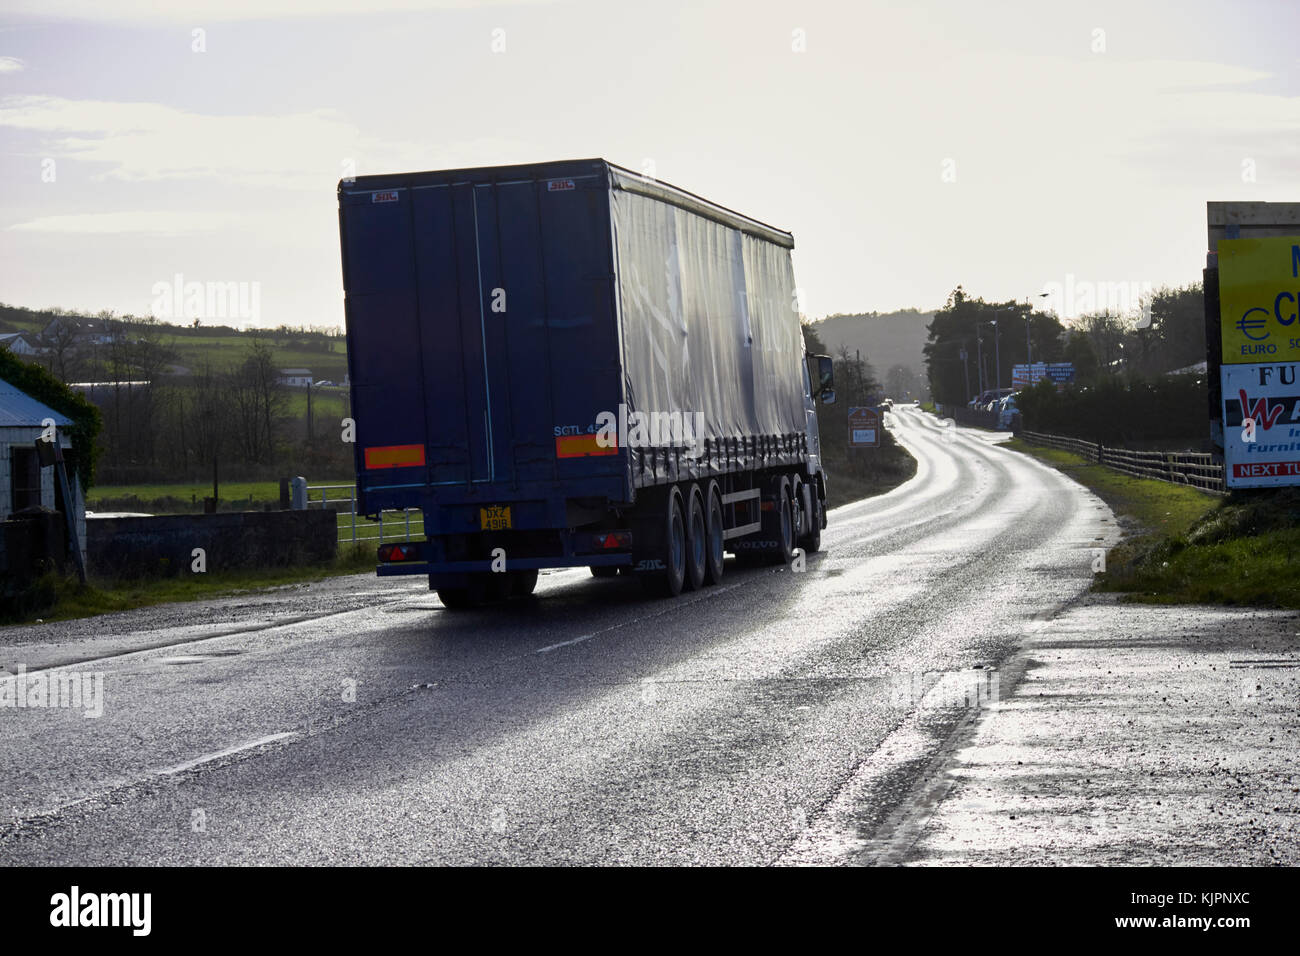 northern ireland freight traffic crossing the irish border between Northern Ireland and Republic of Ireland soon to be the UK EU land border post Brexit. The divided tarmac in the road marking the border on the A1 road the former main route between Belfast and Dublin. Credit: Radharc Images/Alamy Live News Stock Photo